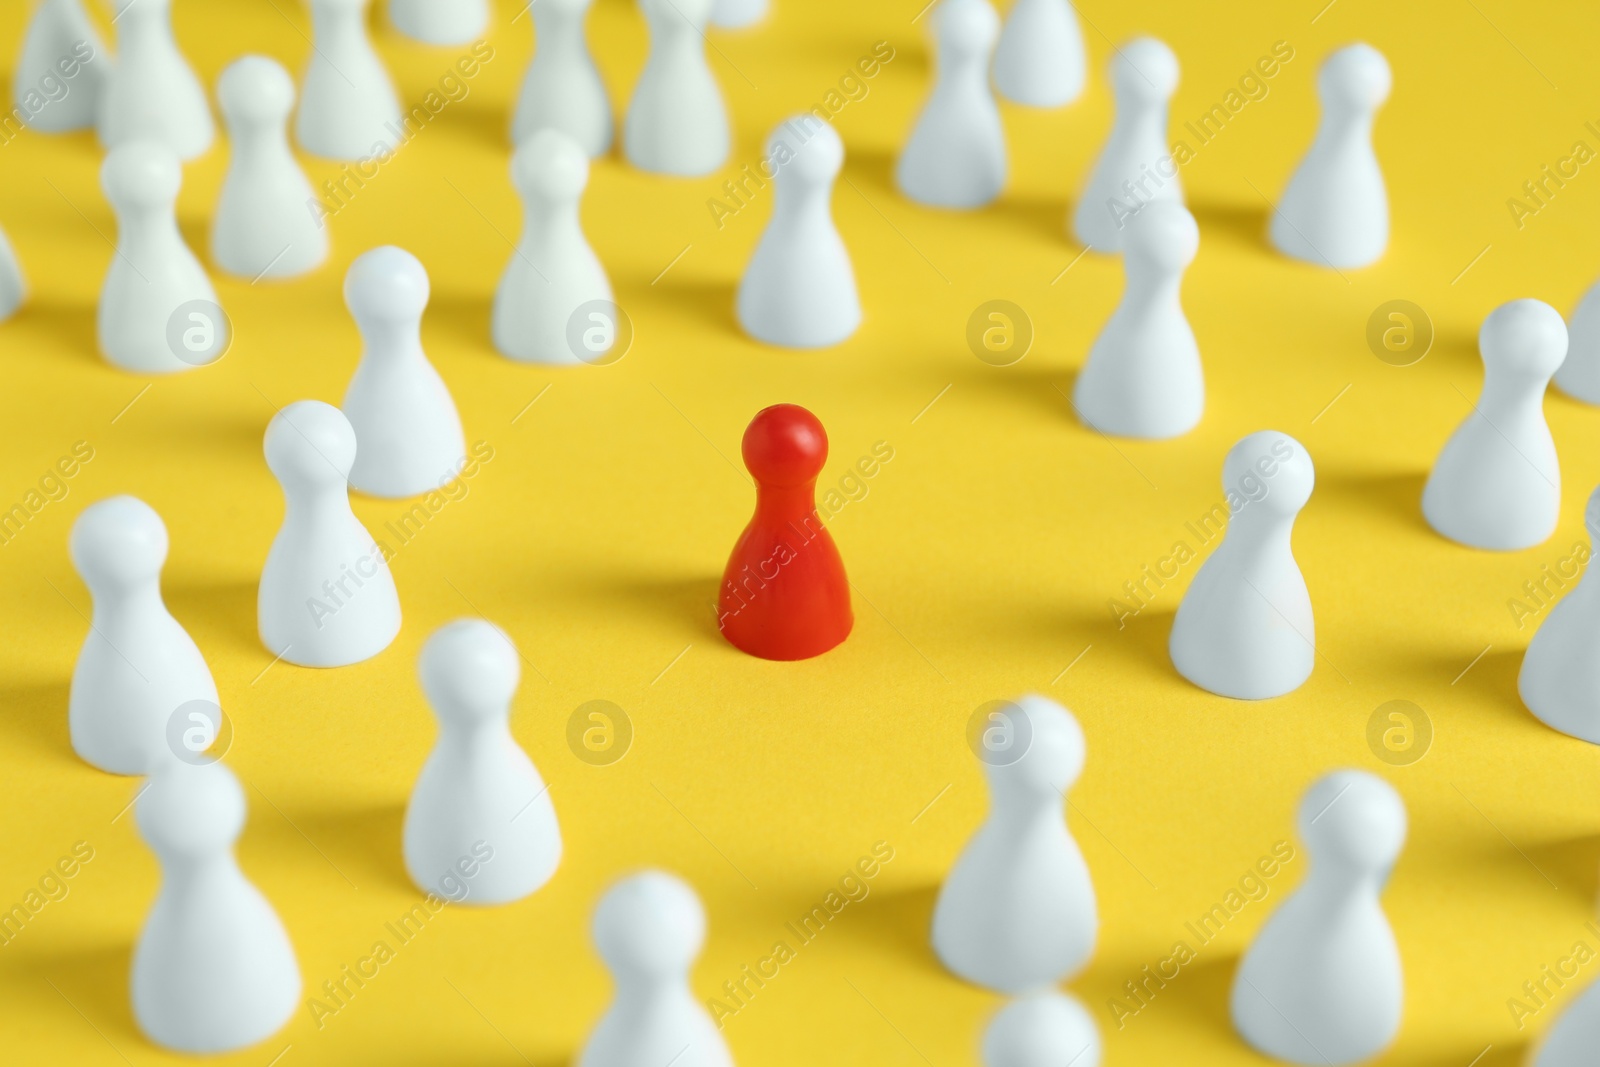 Photo of One red pawn among others on yellow background. Social inclusion concept